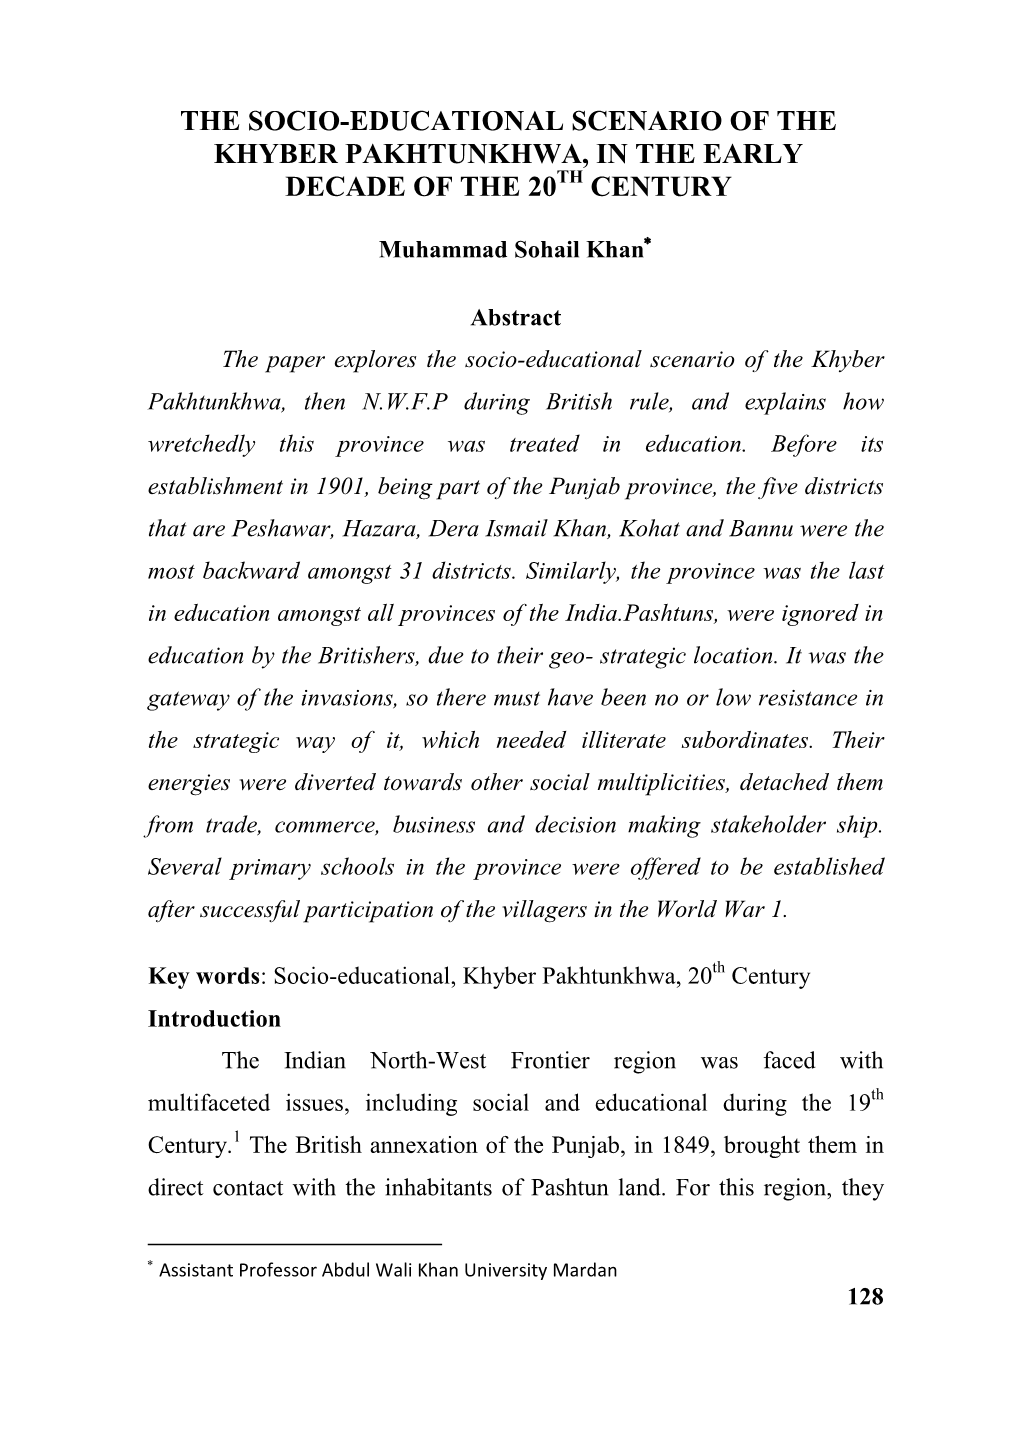 The Socio-Educational Scenario of the Khyber Pakhtunkhwa, in the Early Decade of the 20Th Century